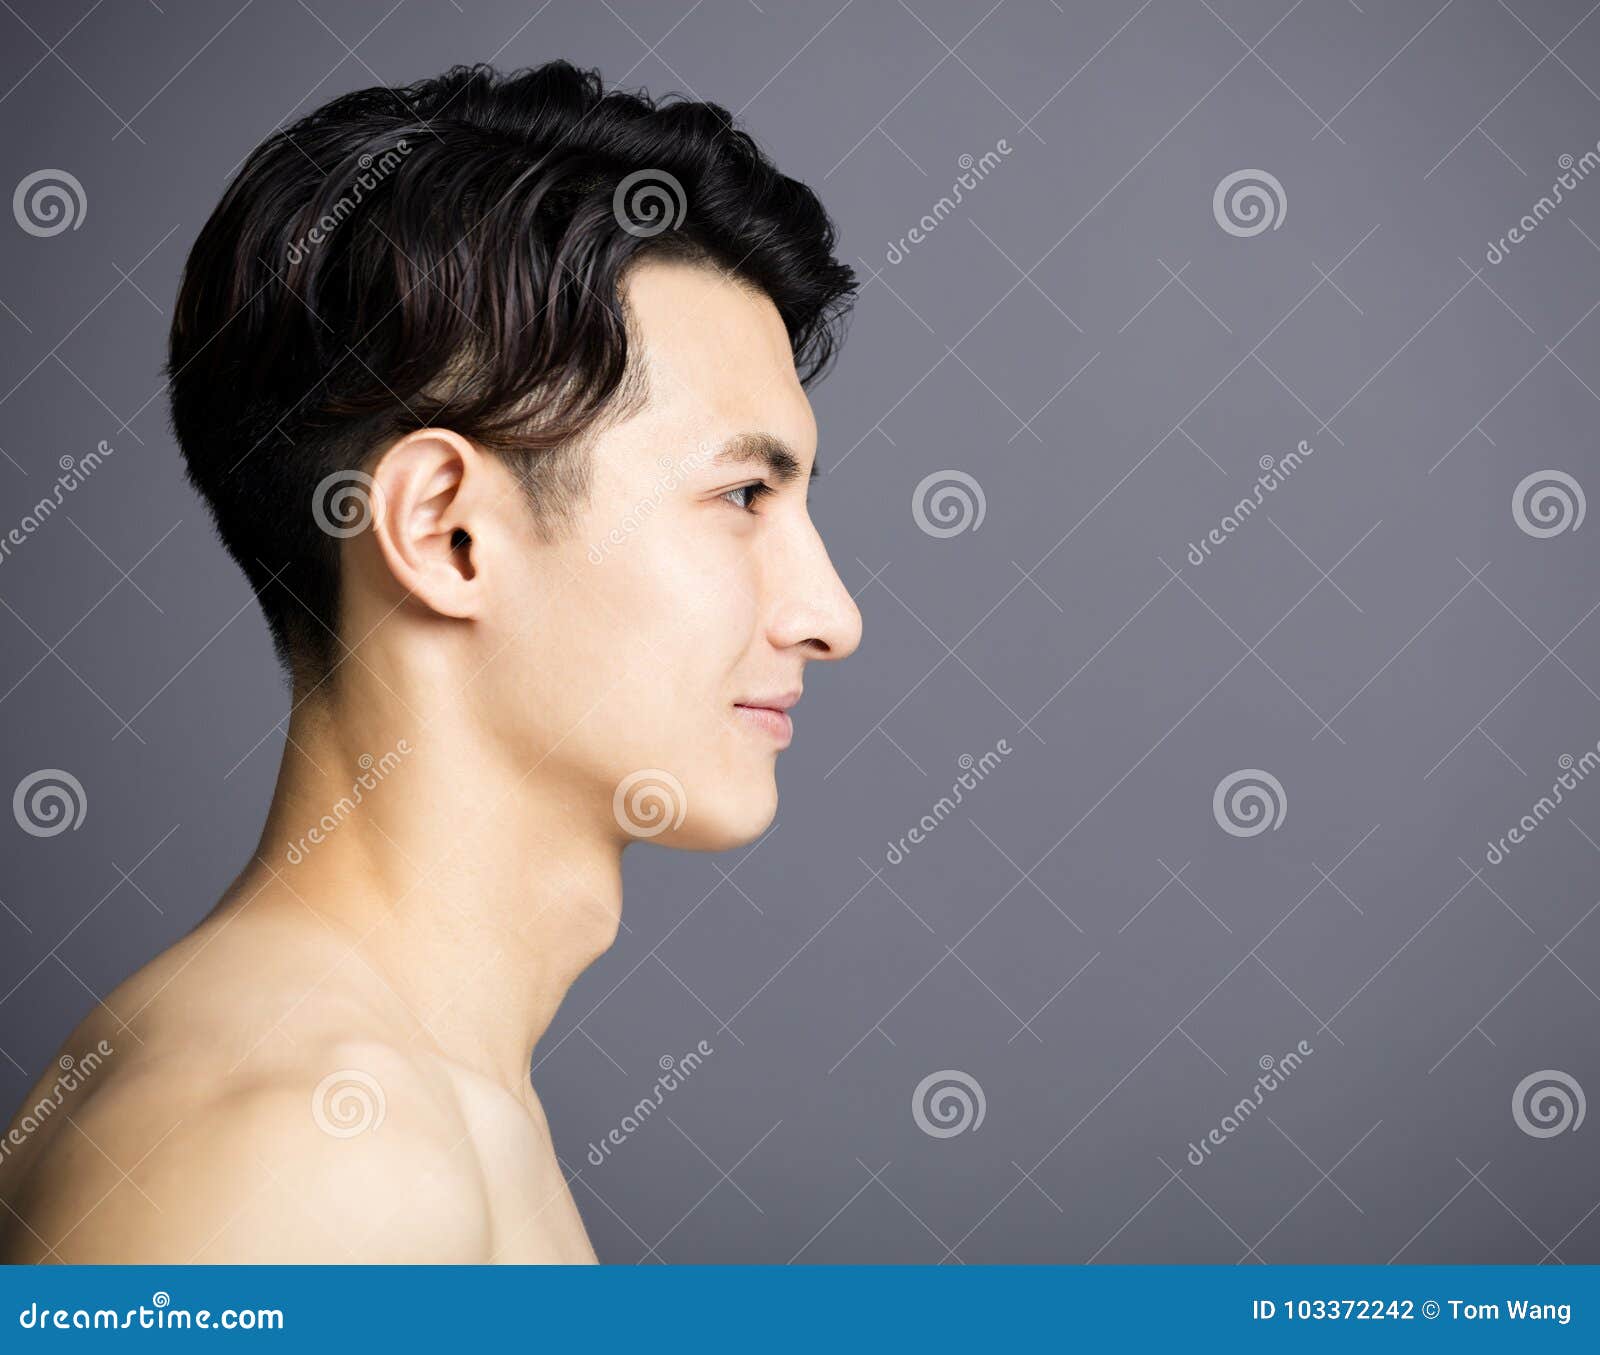 Male Model Side View Nearly Naked Skater